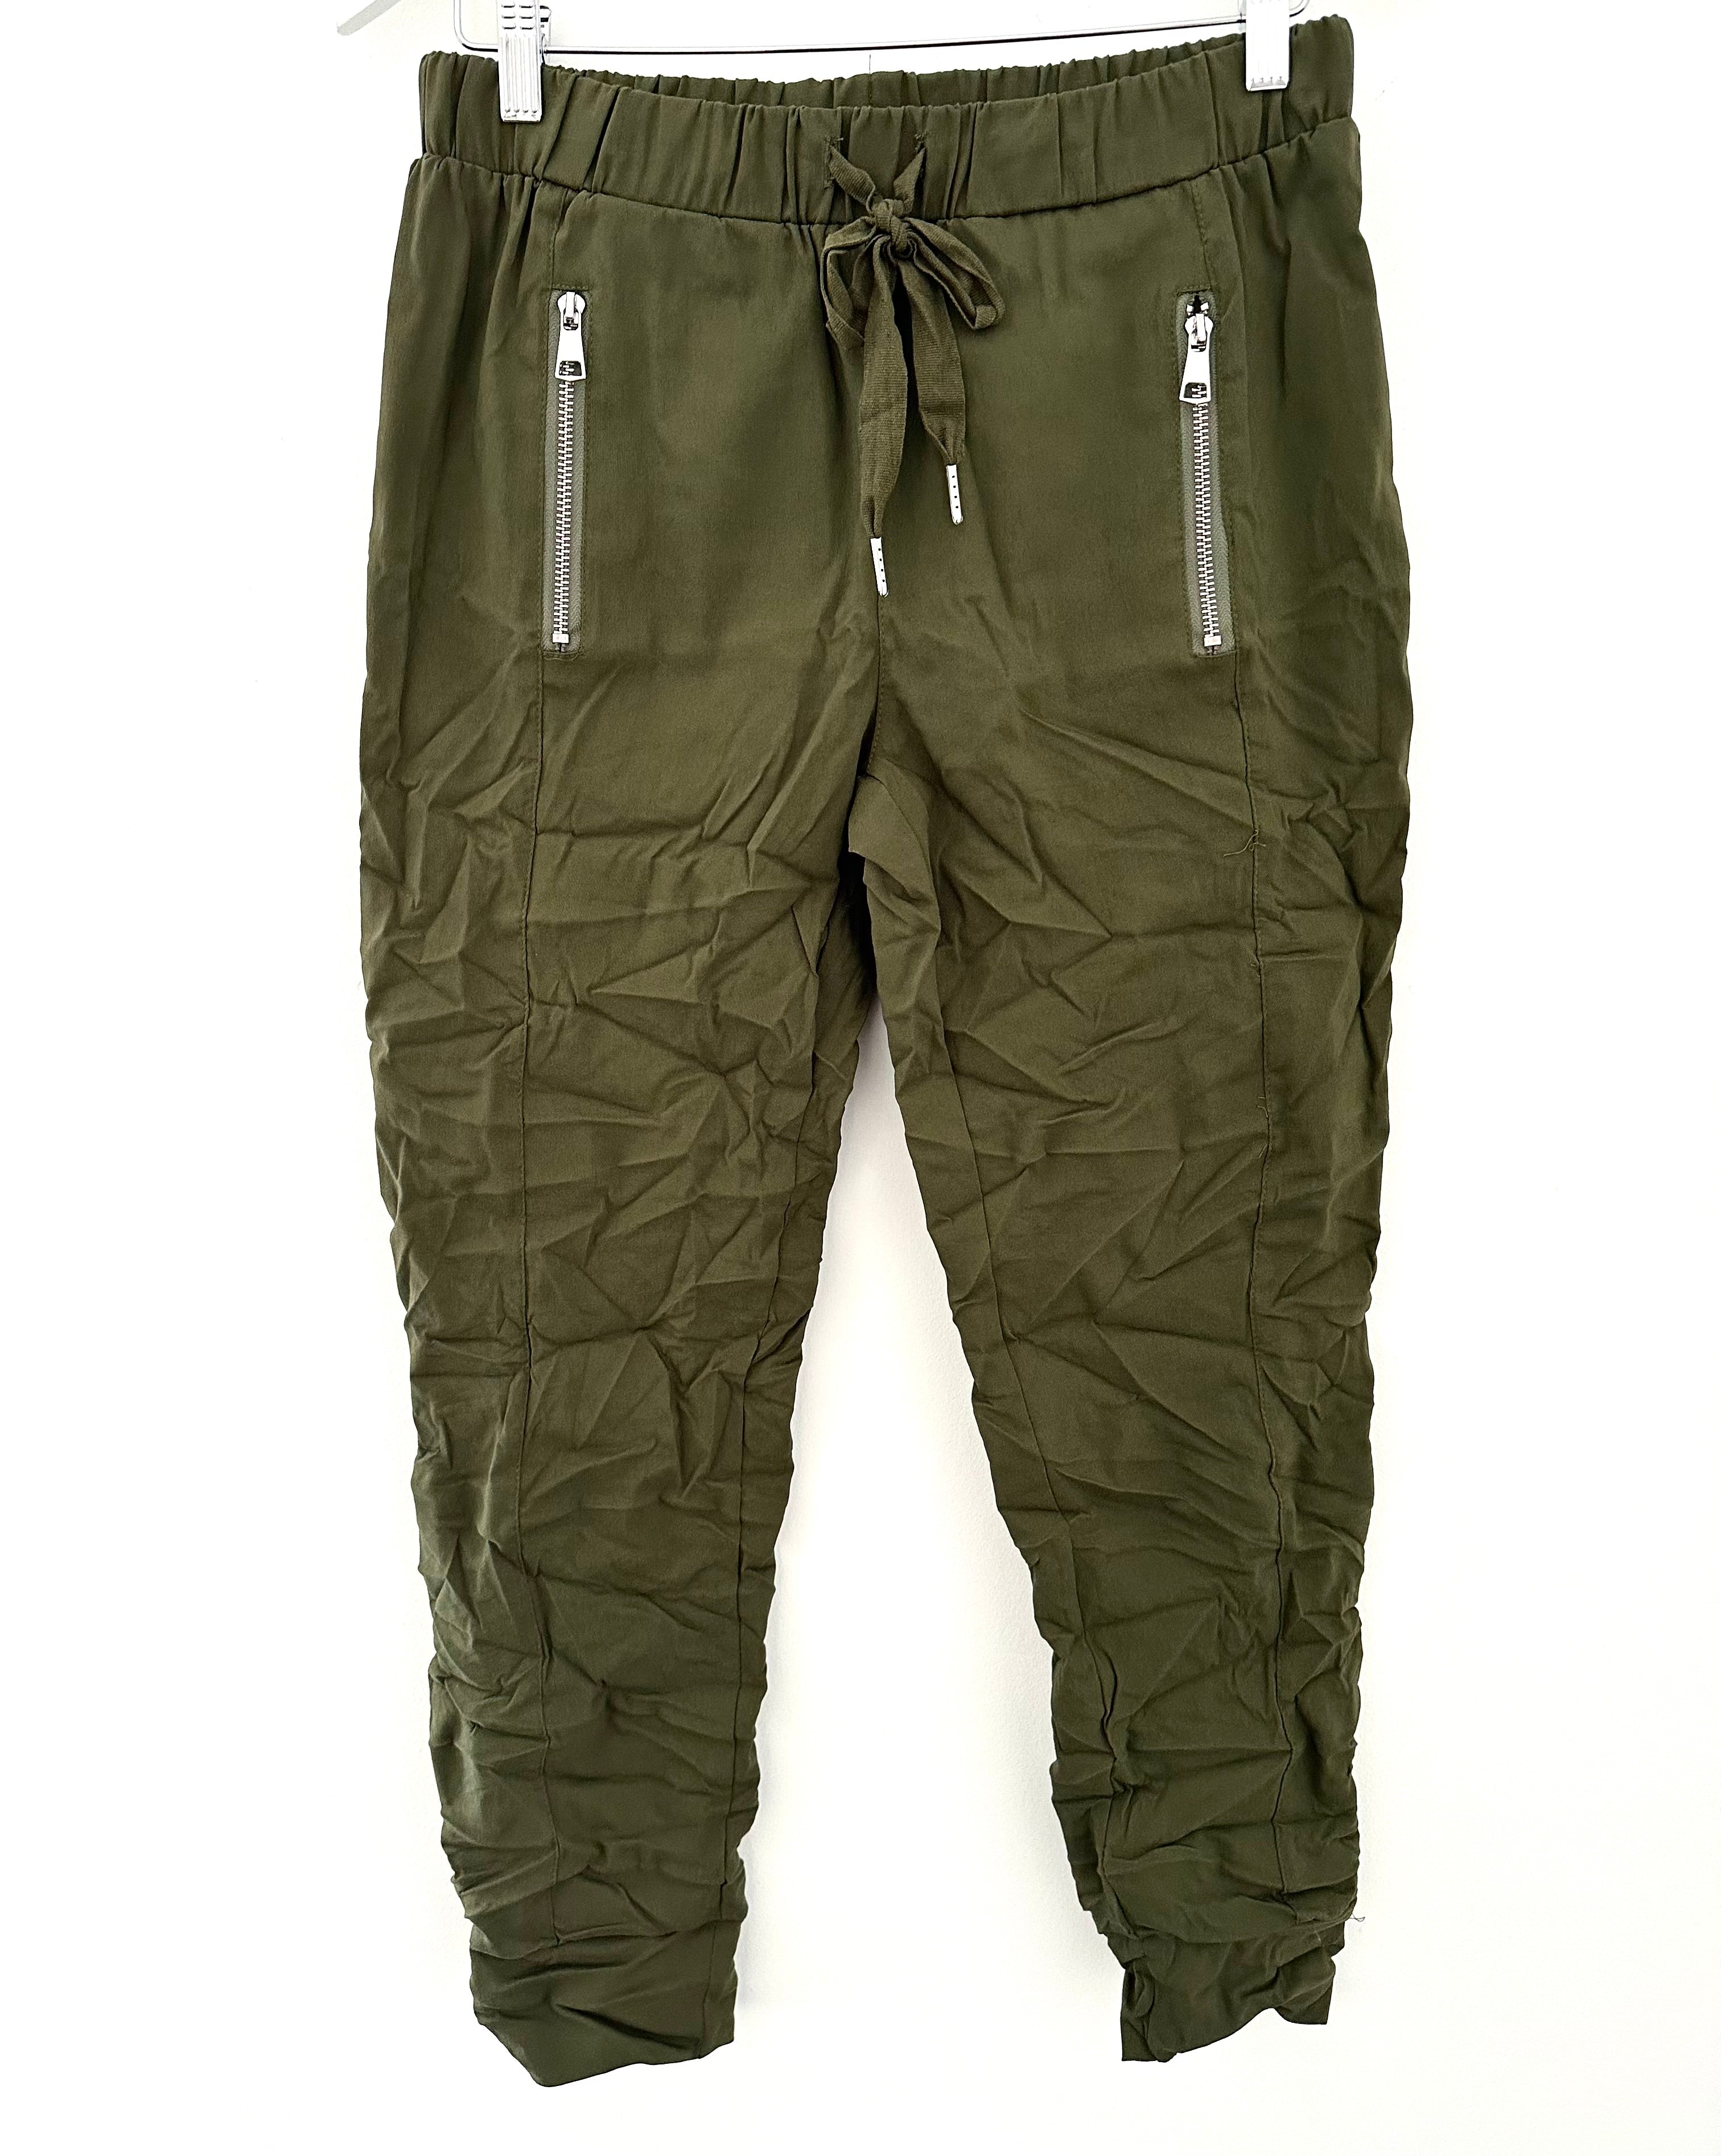 Crinkle Joggers with Pockets in Khaki